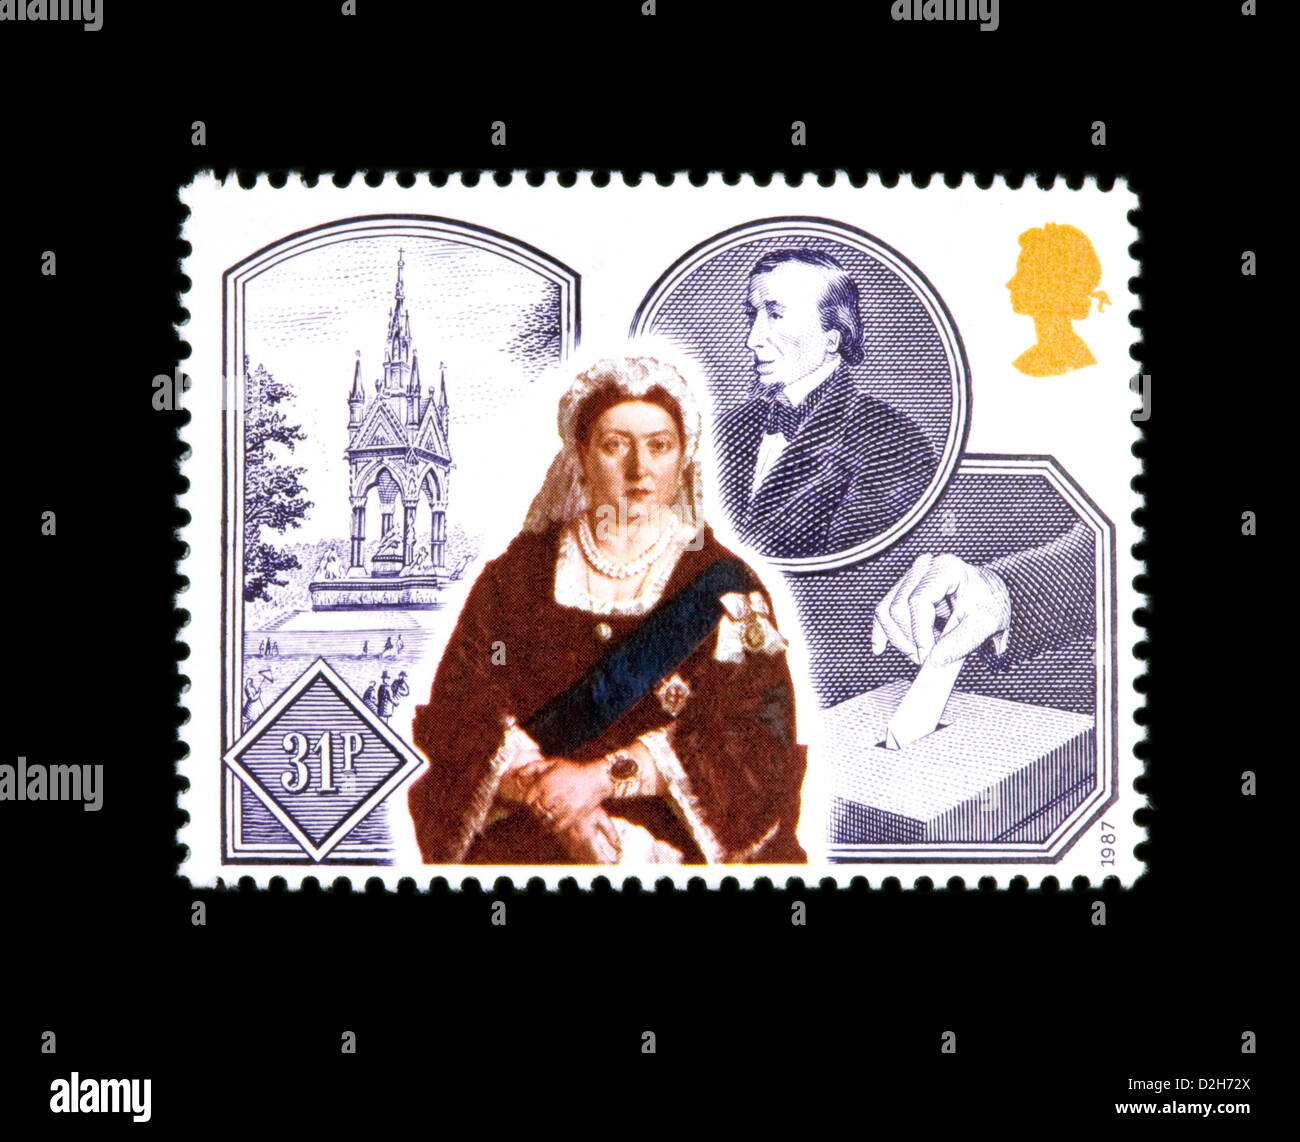 British 1987 commemorative postage stamp showing an old Queen Victoria, UK Stock Photo